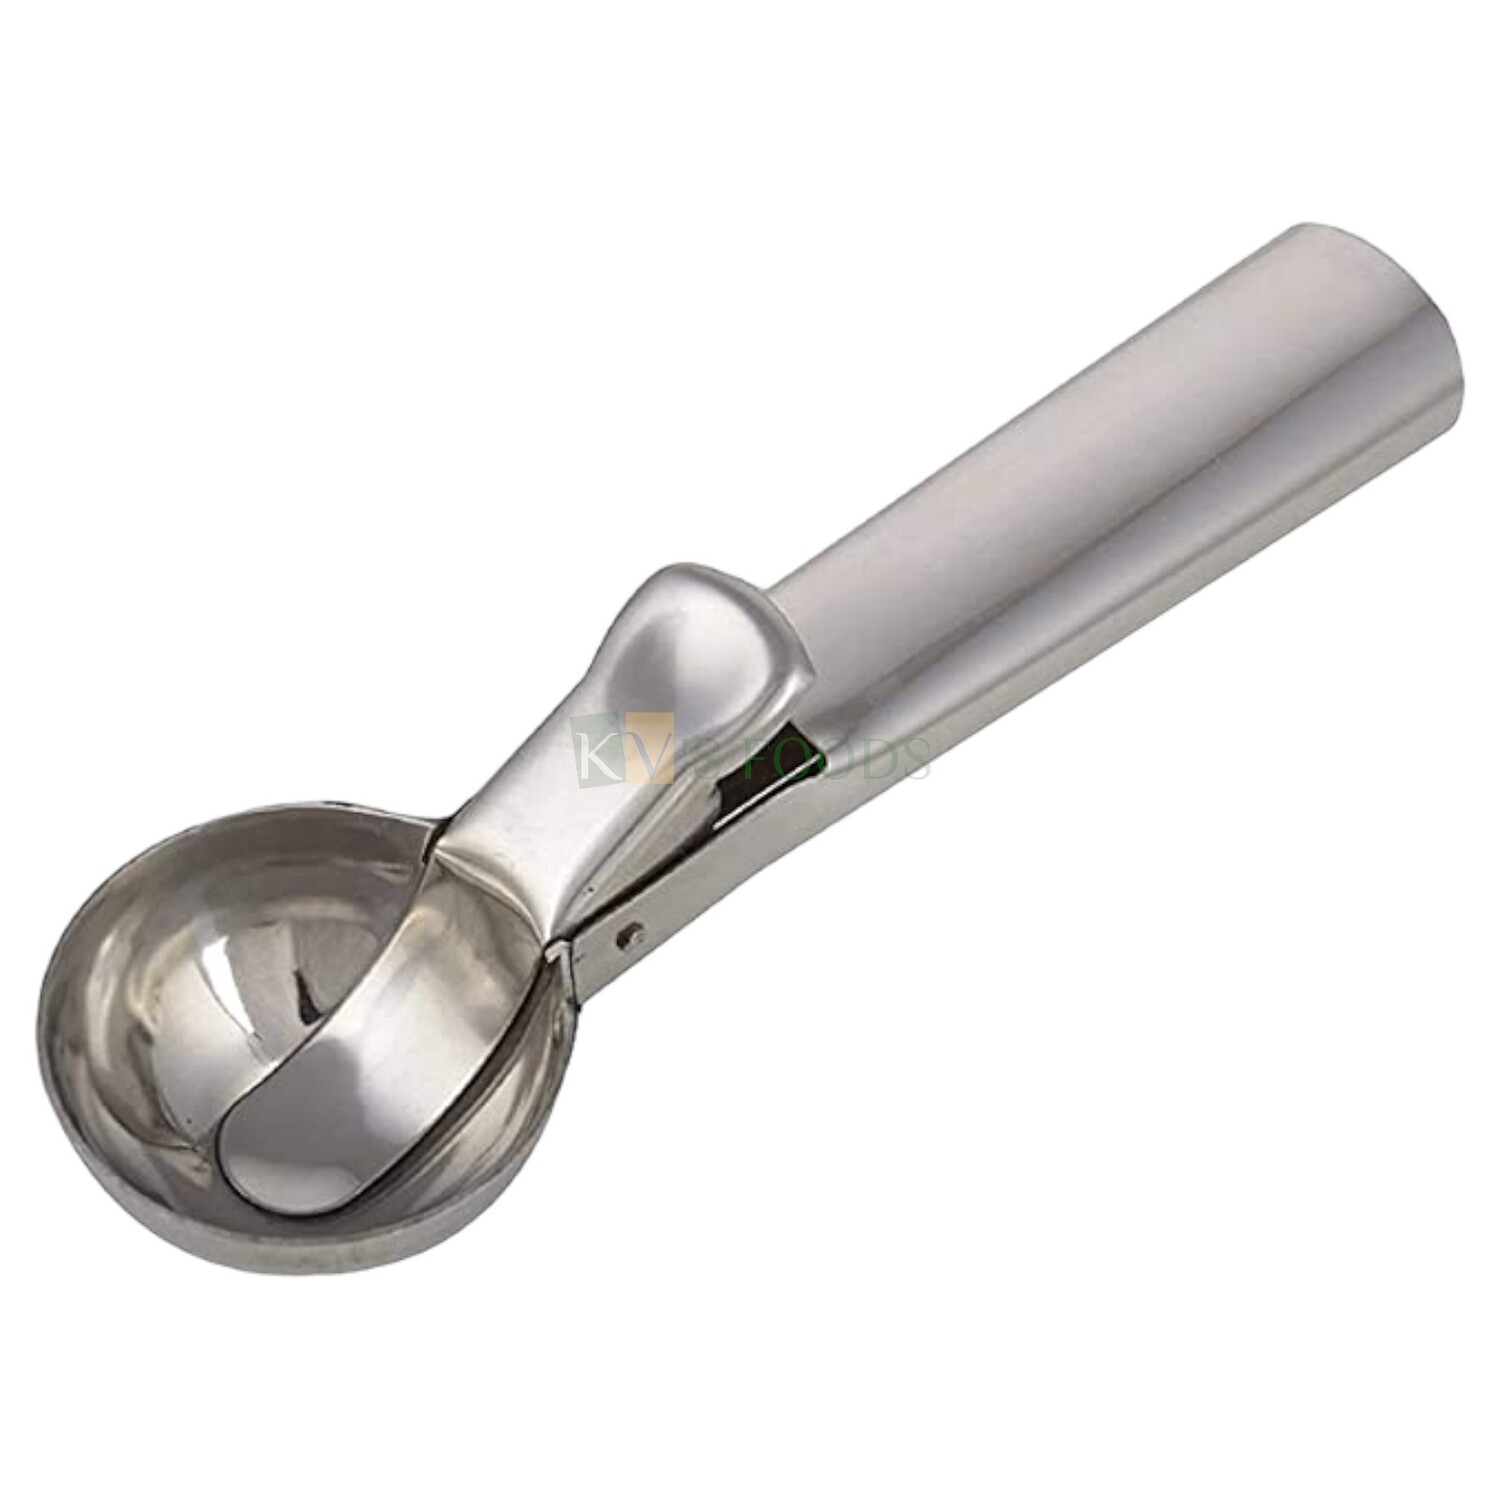 1PC Stainless Steel Easy Trigger Release Pop-up Leaver Ice Cream Fruit Scoop Scooper Serving Spoon Big Size, Multifunctional, Silver